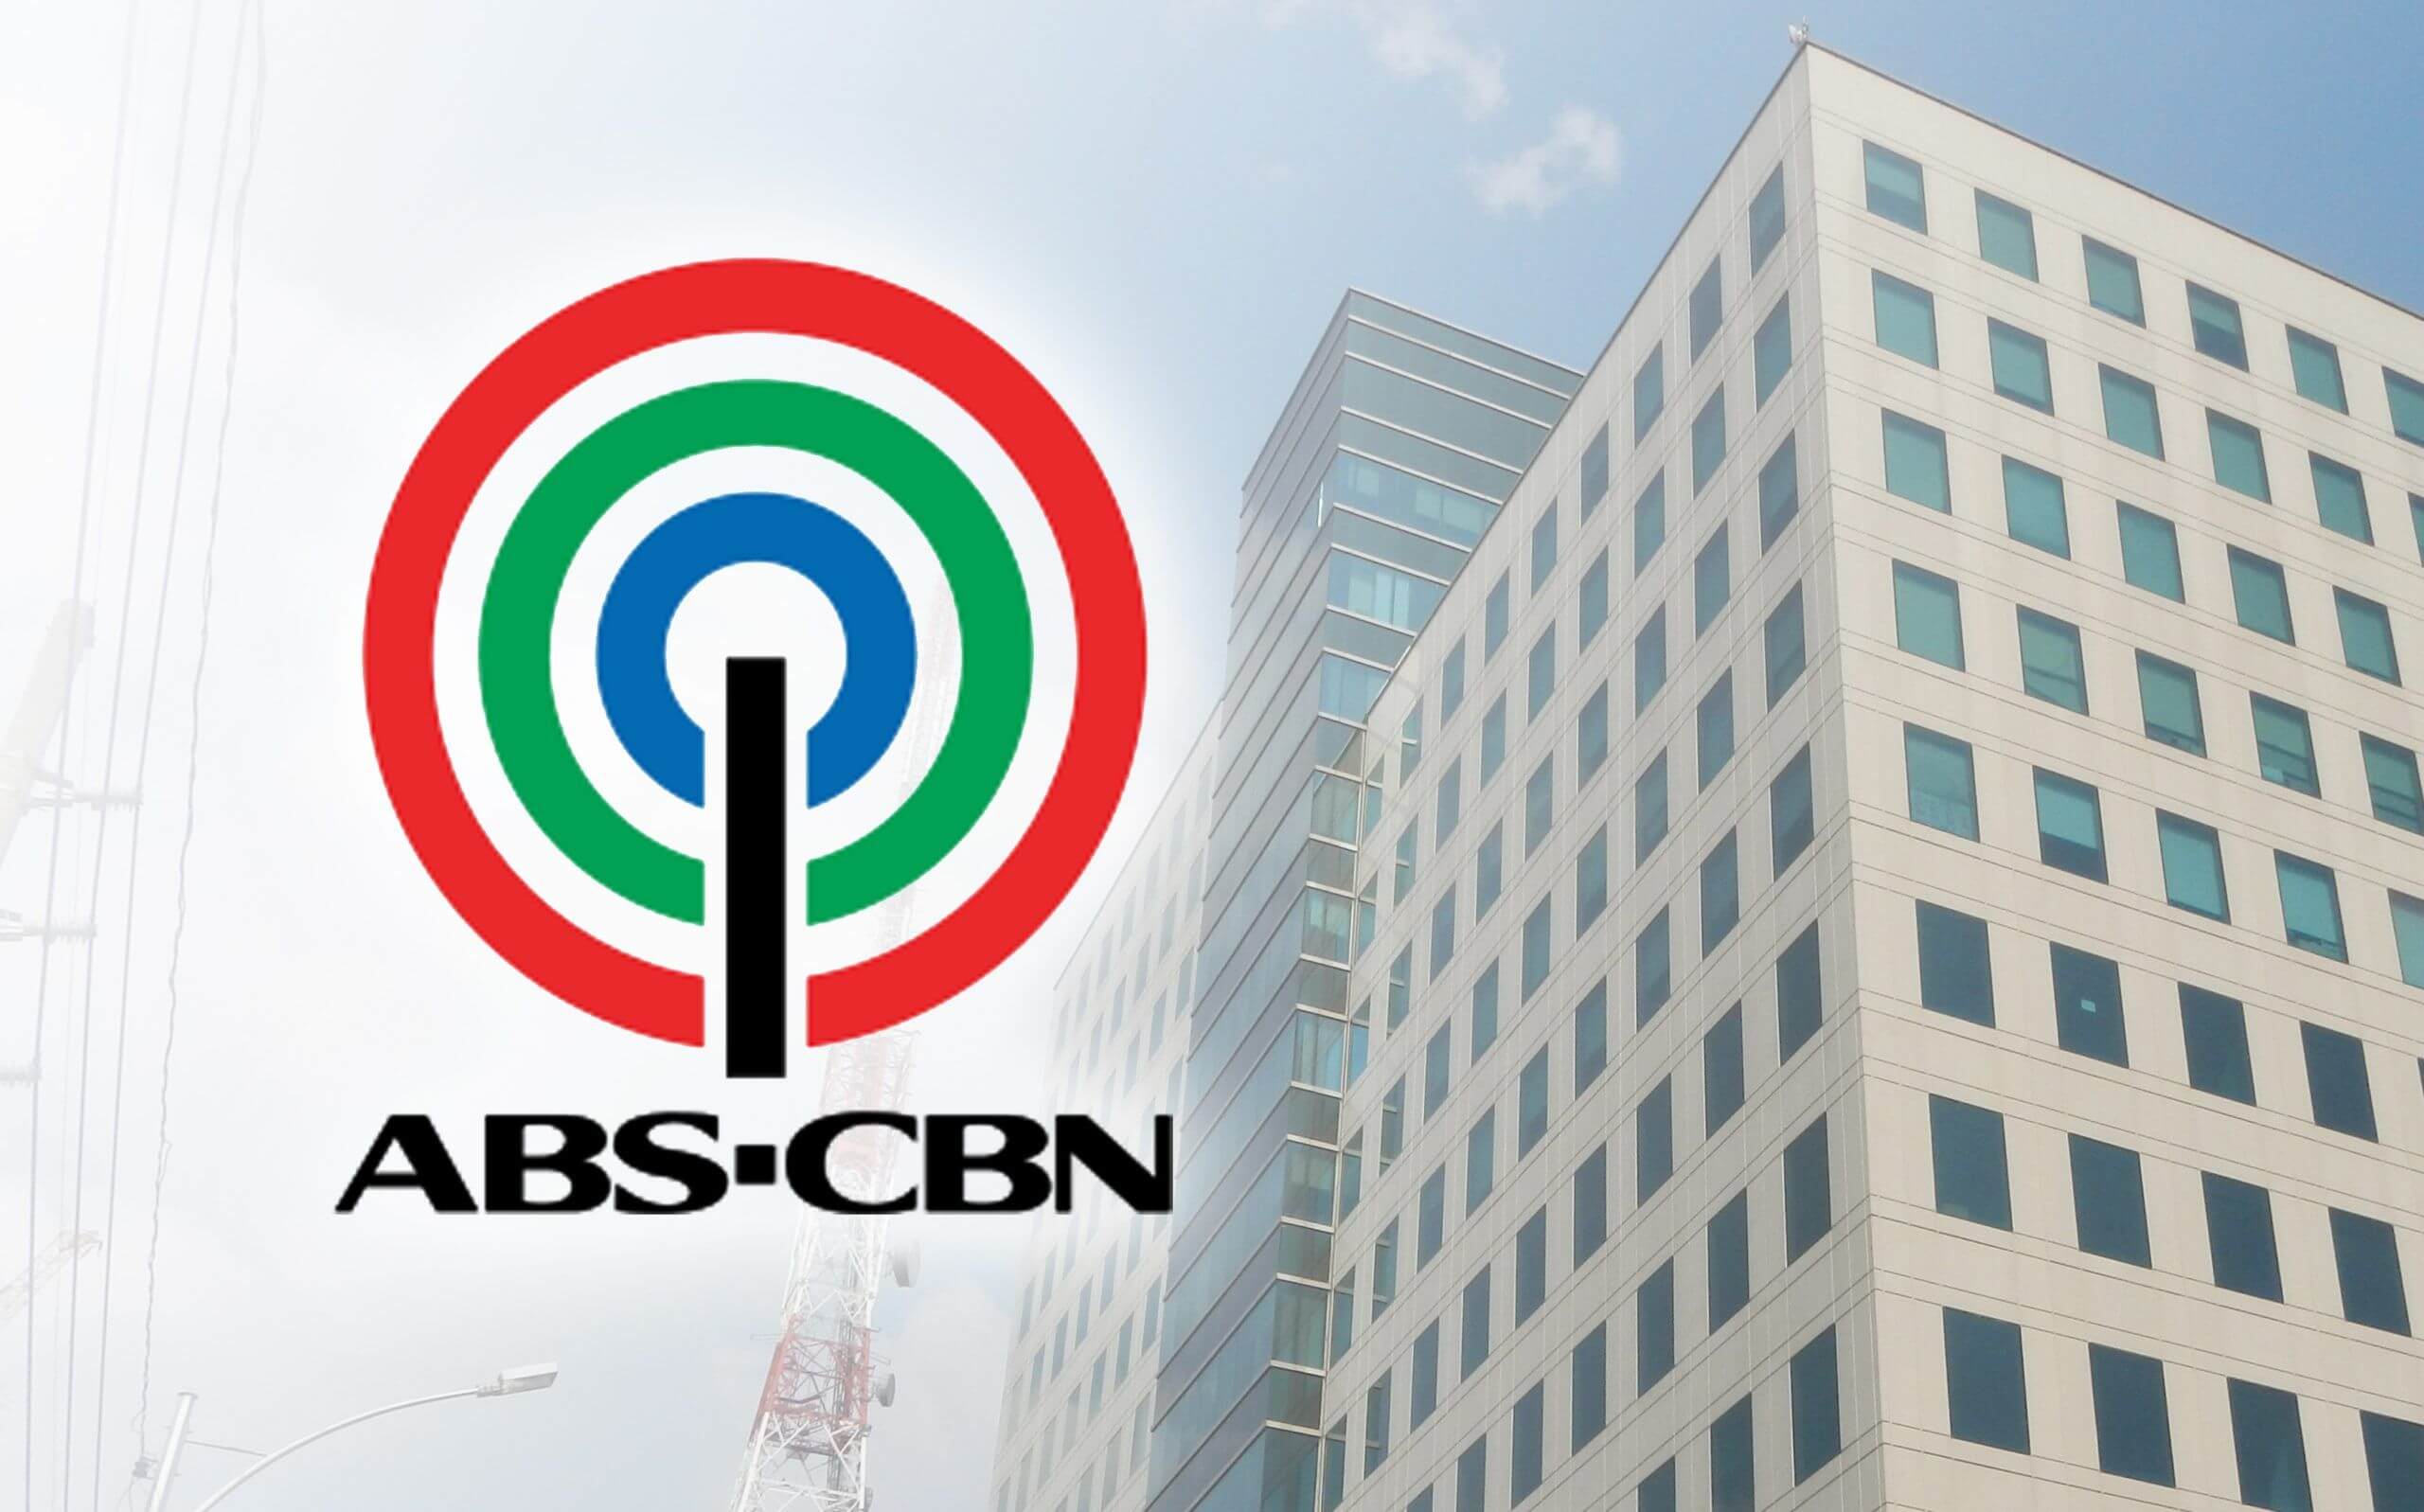 ABS-CBN frequency